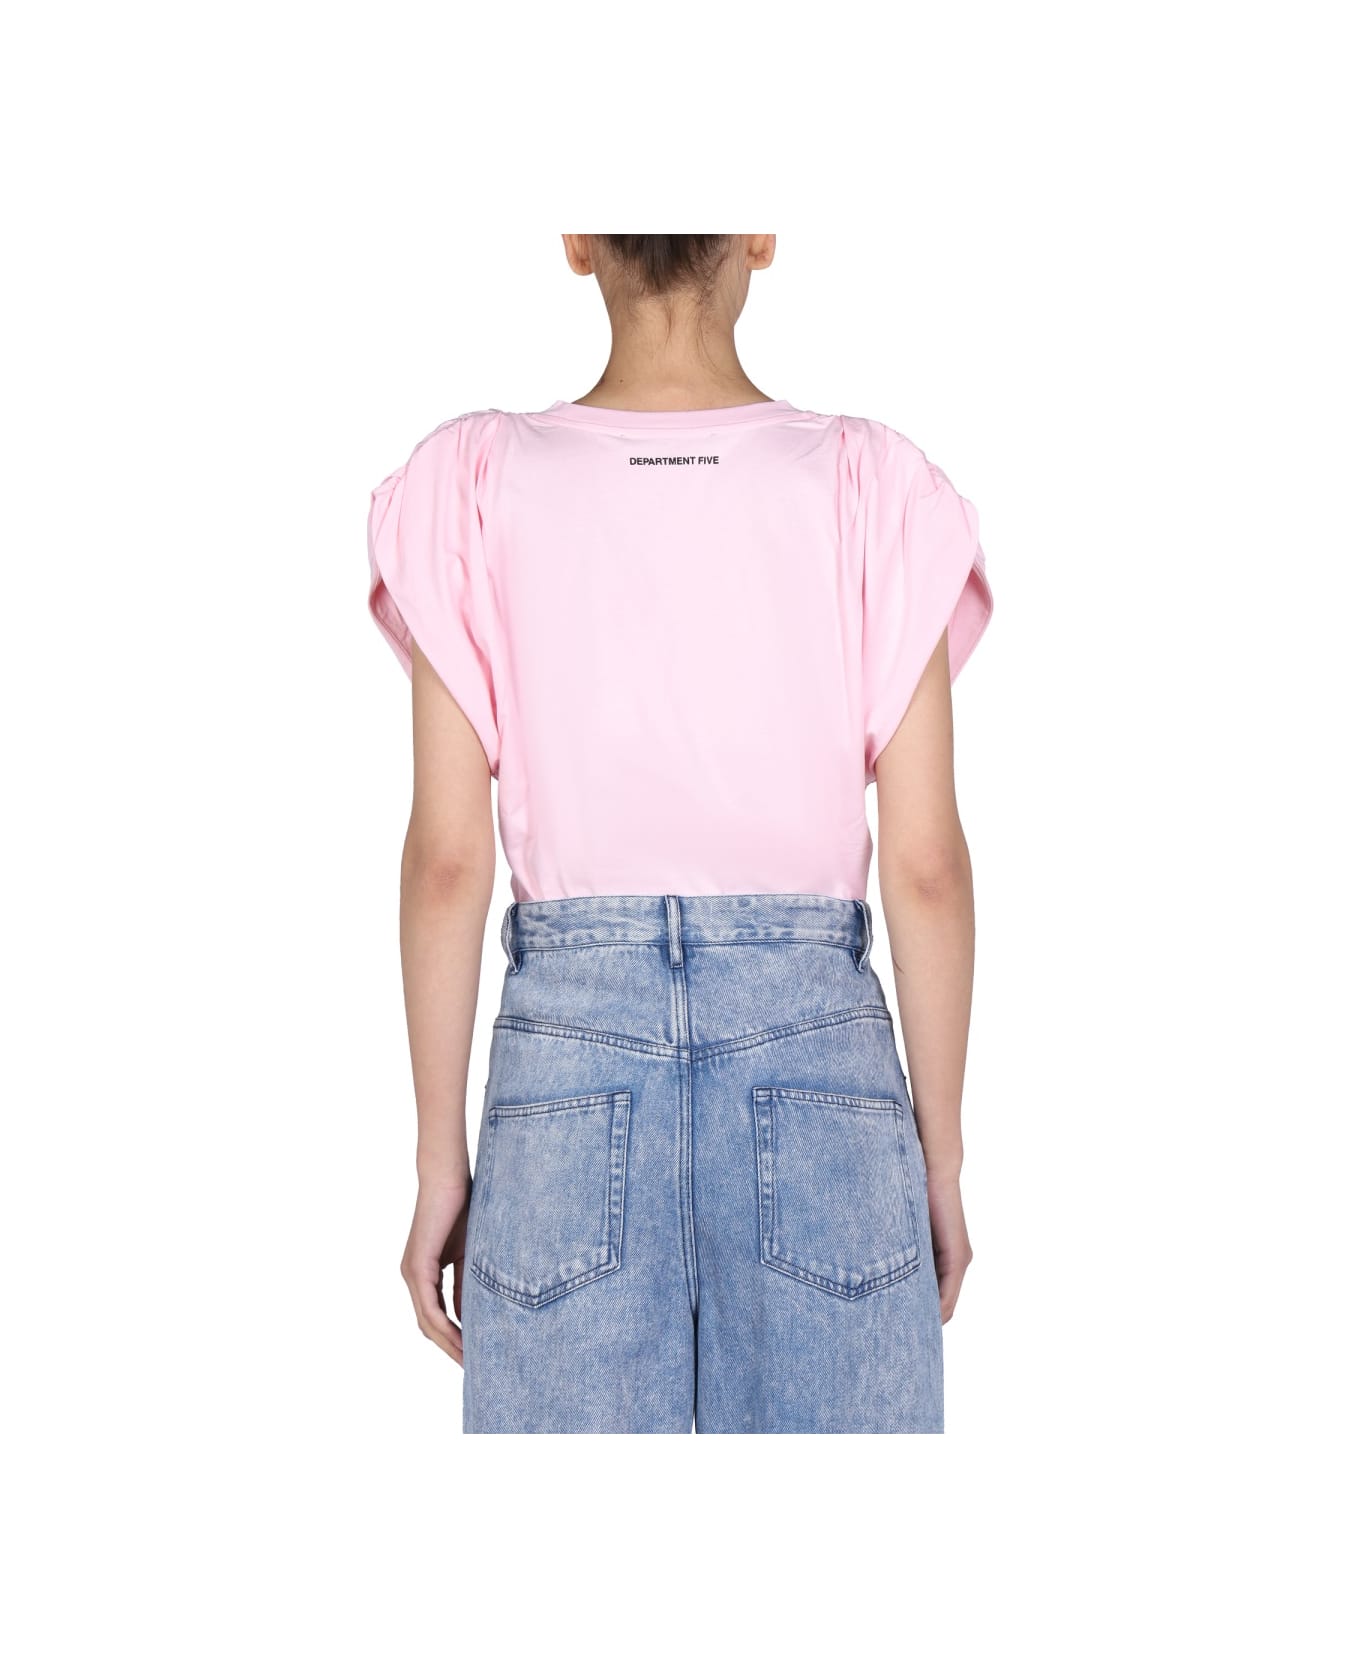 Department Five "hollywood" T-shirt - PINK